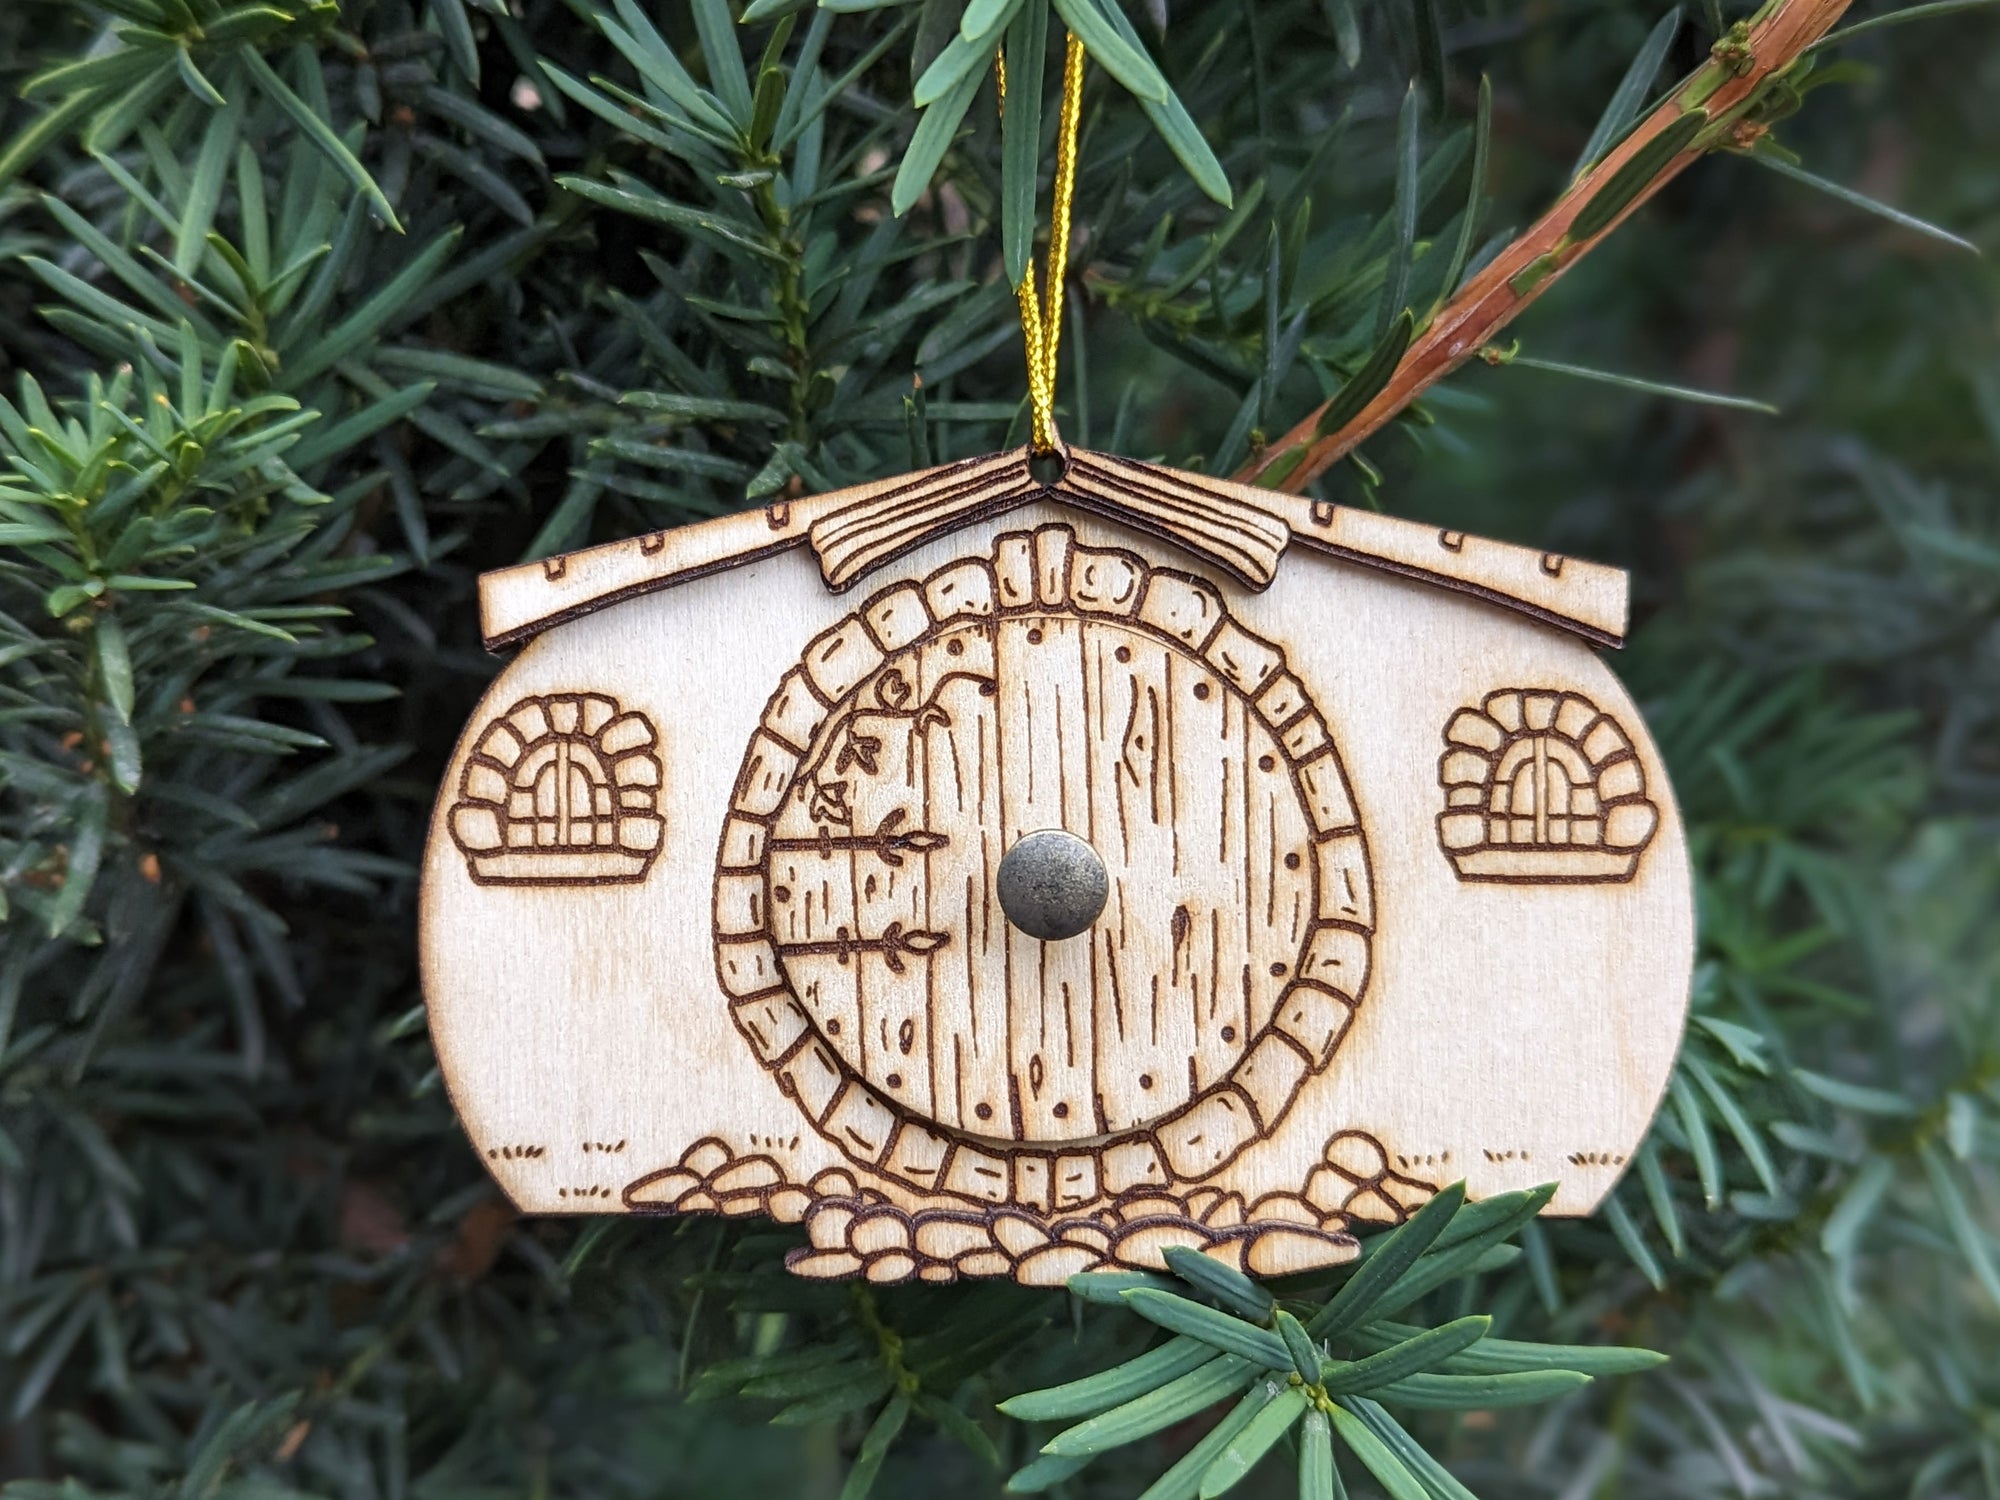 Lord of the Rings Hobbit Hole 2-Sided Christmas Ornament